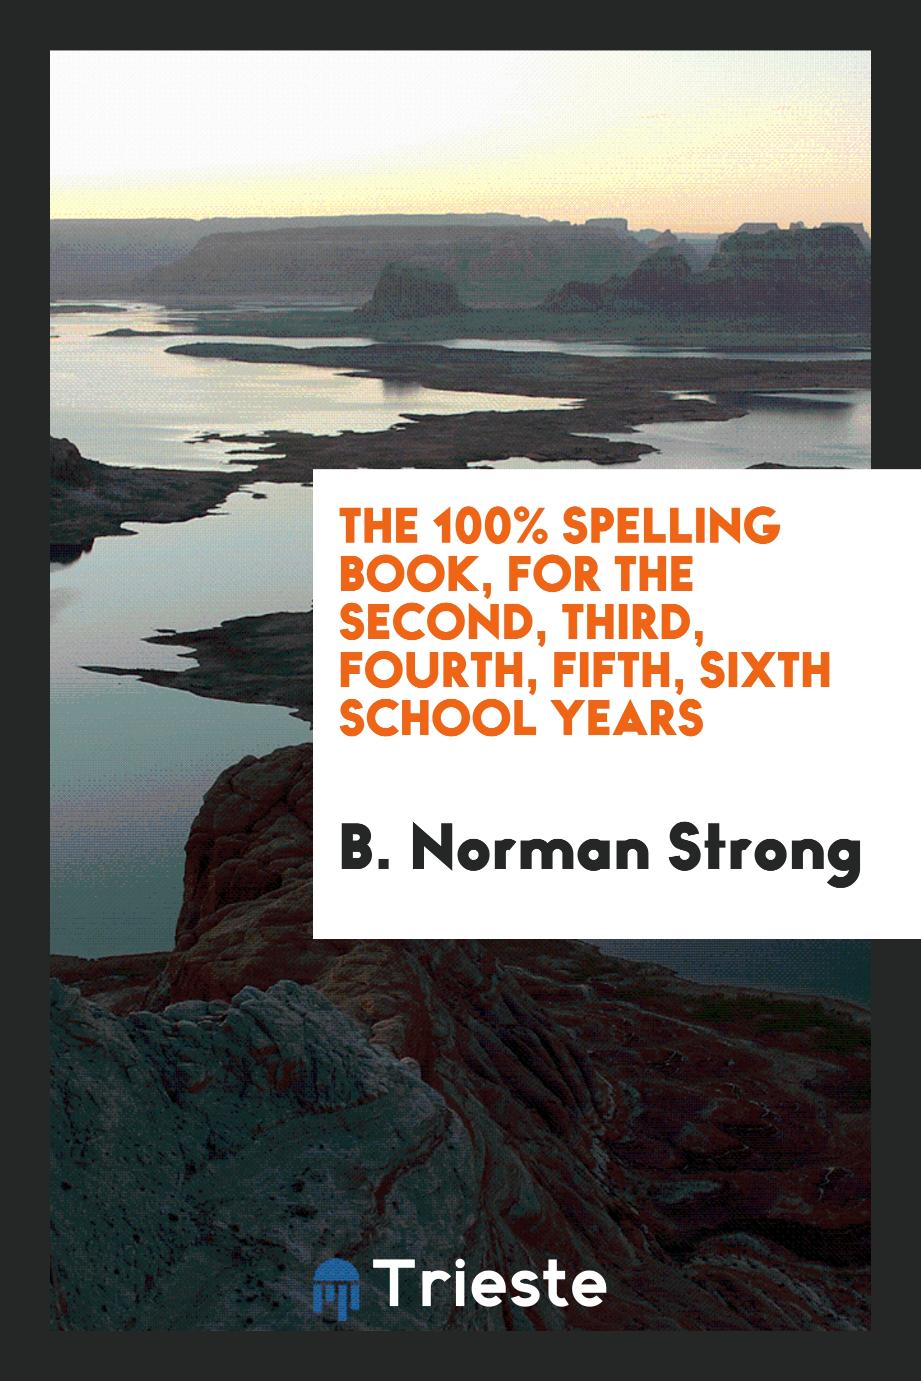 The 100% Spelling Book, for the second, third, fourth, fifth, sixth school years